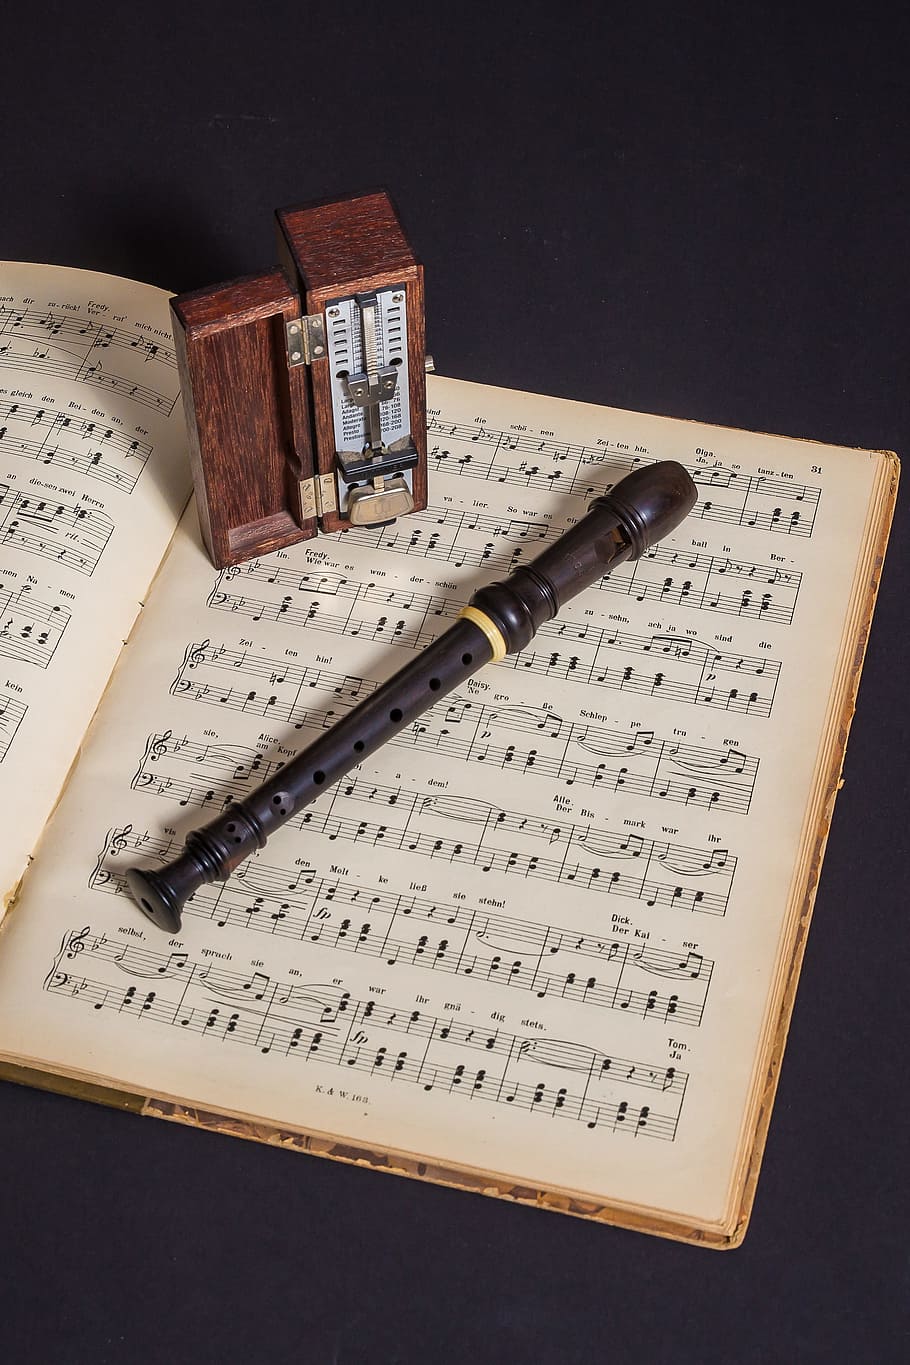 black, white, flute, brown, metronome, recorder, musical instruments, woodwind, wooden flute, music